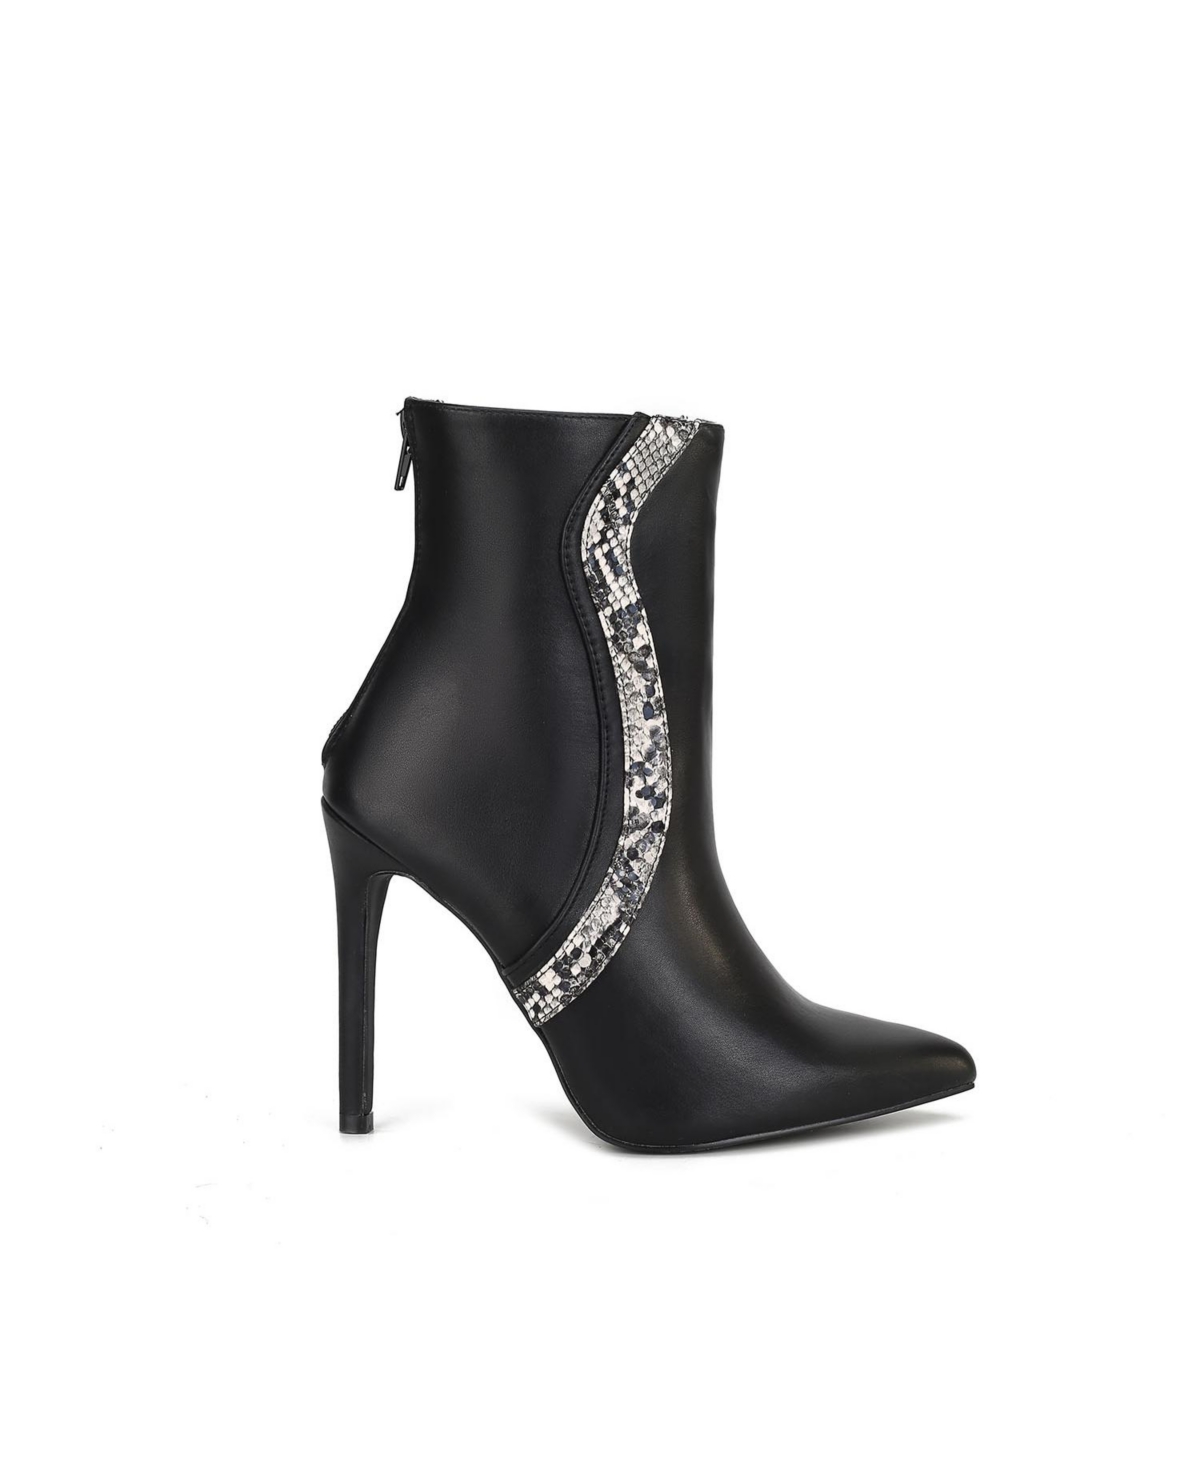 Celeste Snake Embossed high Heels Ankle Boot by Mia K - Red